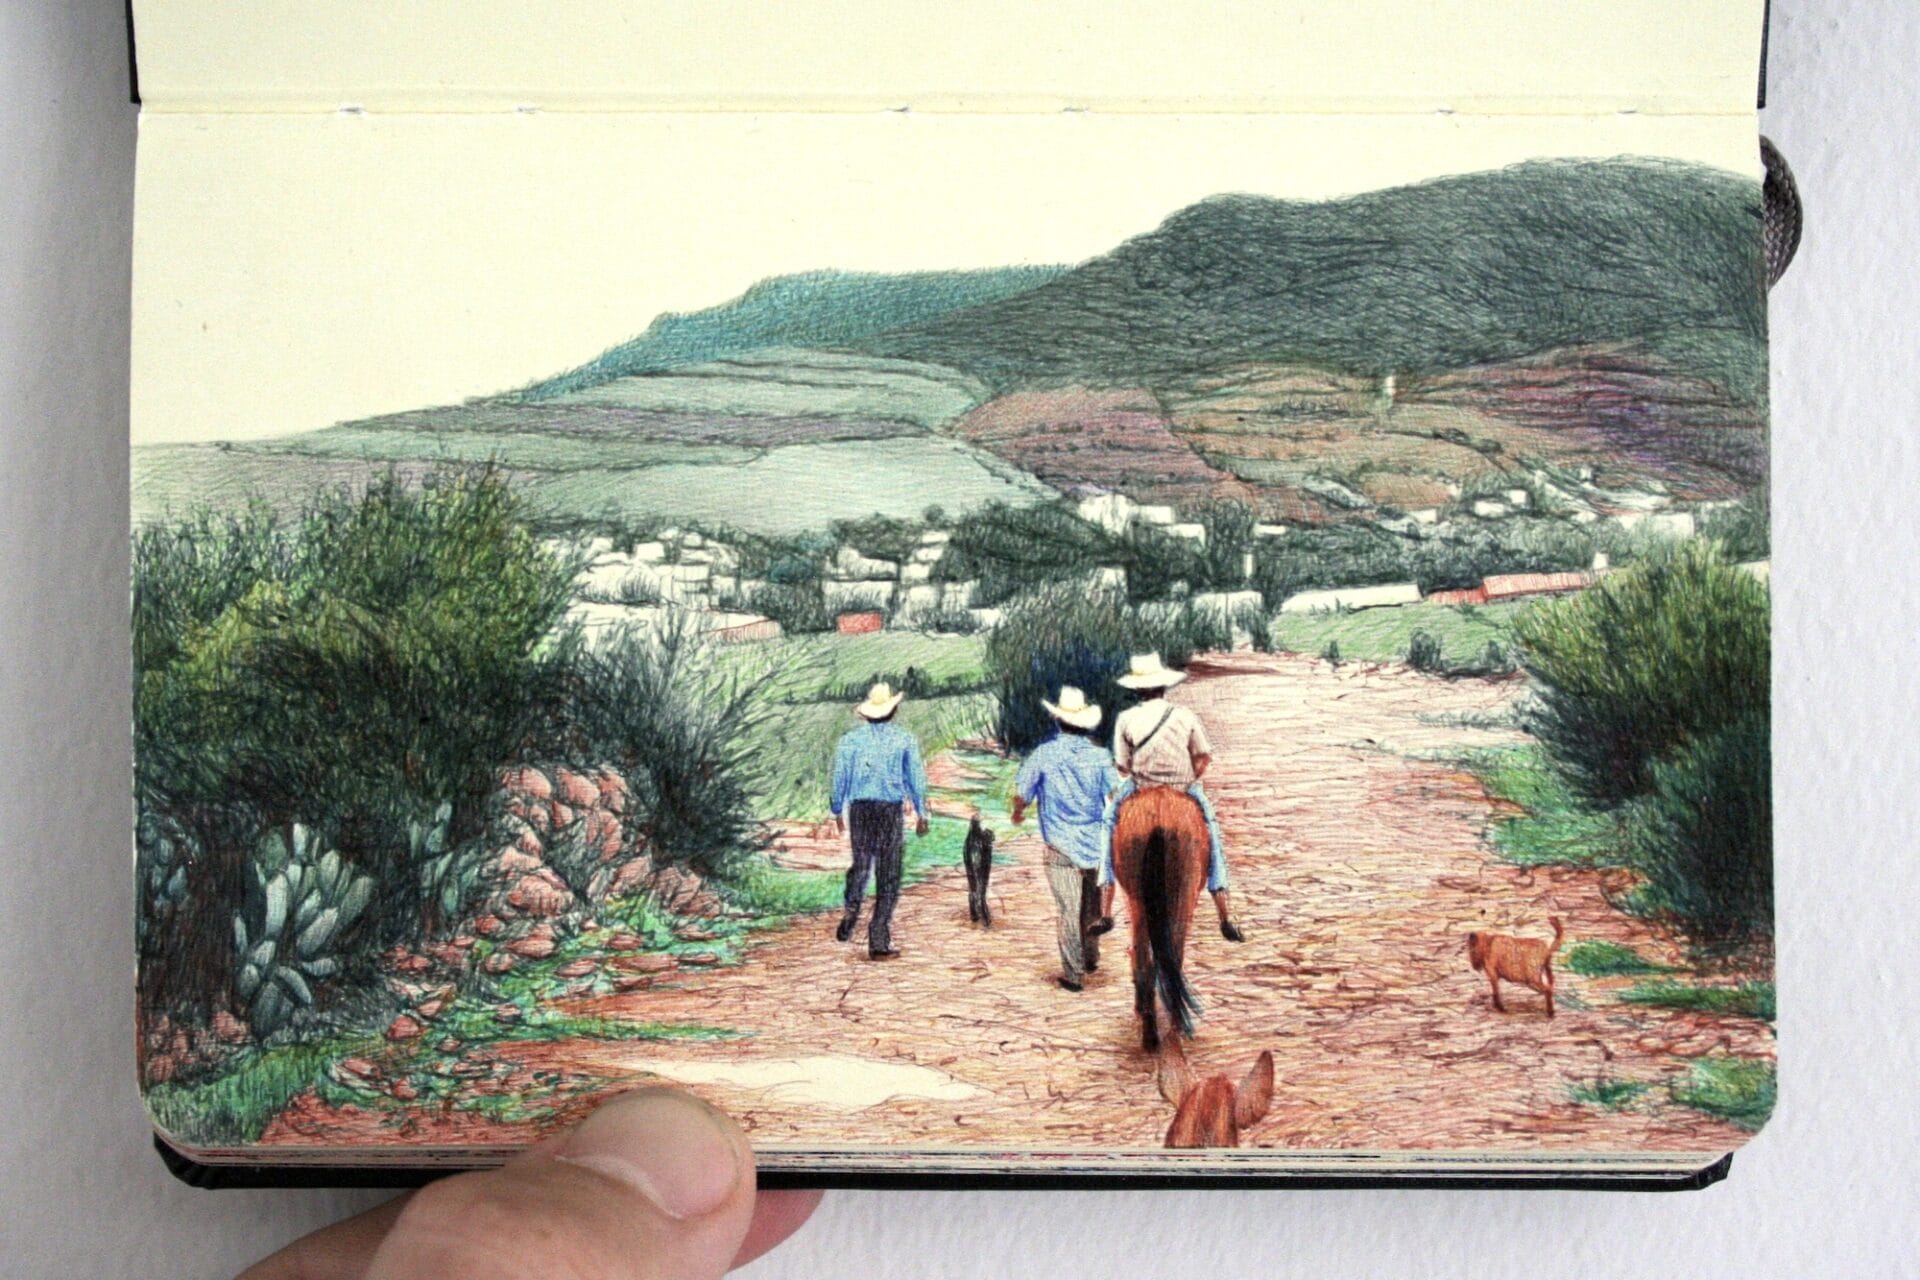 a ballpoint pen drawing of three men and a dog walking down a dirt road in an agricultural setting, in a small sketchbook